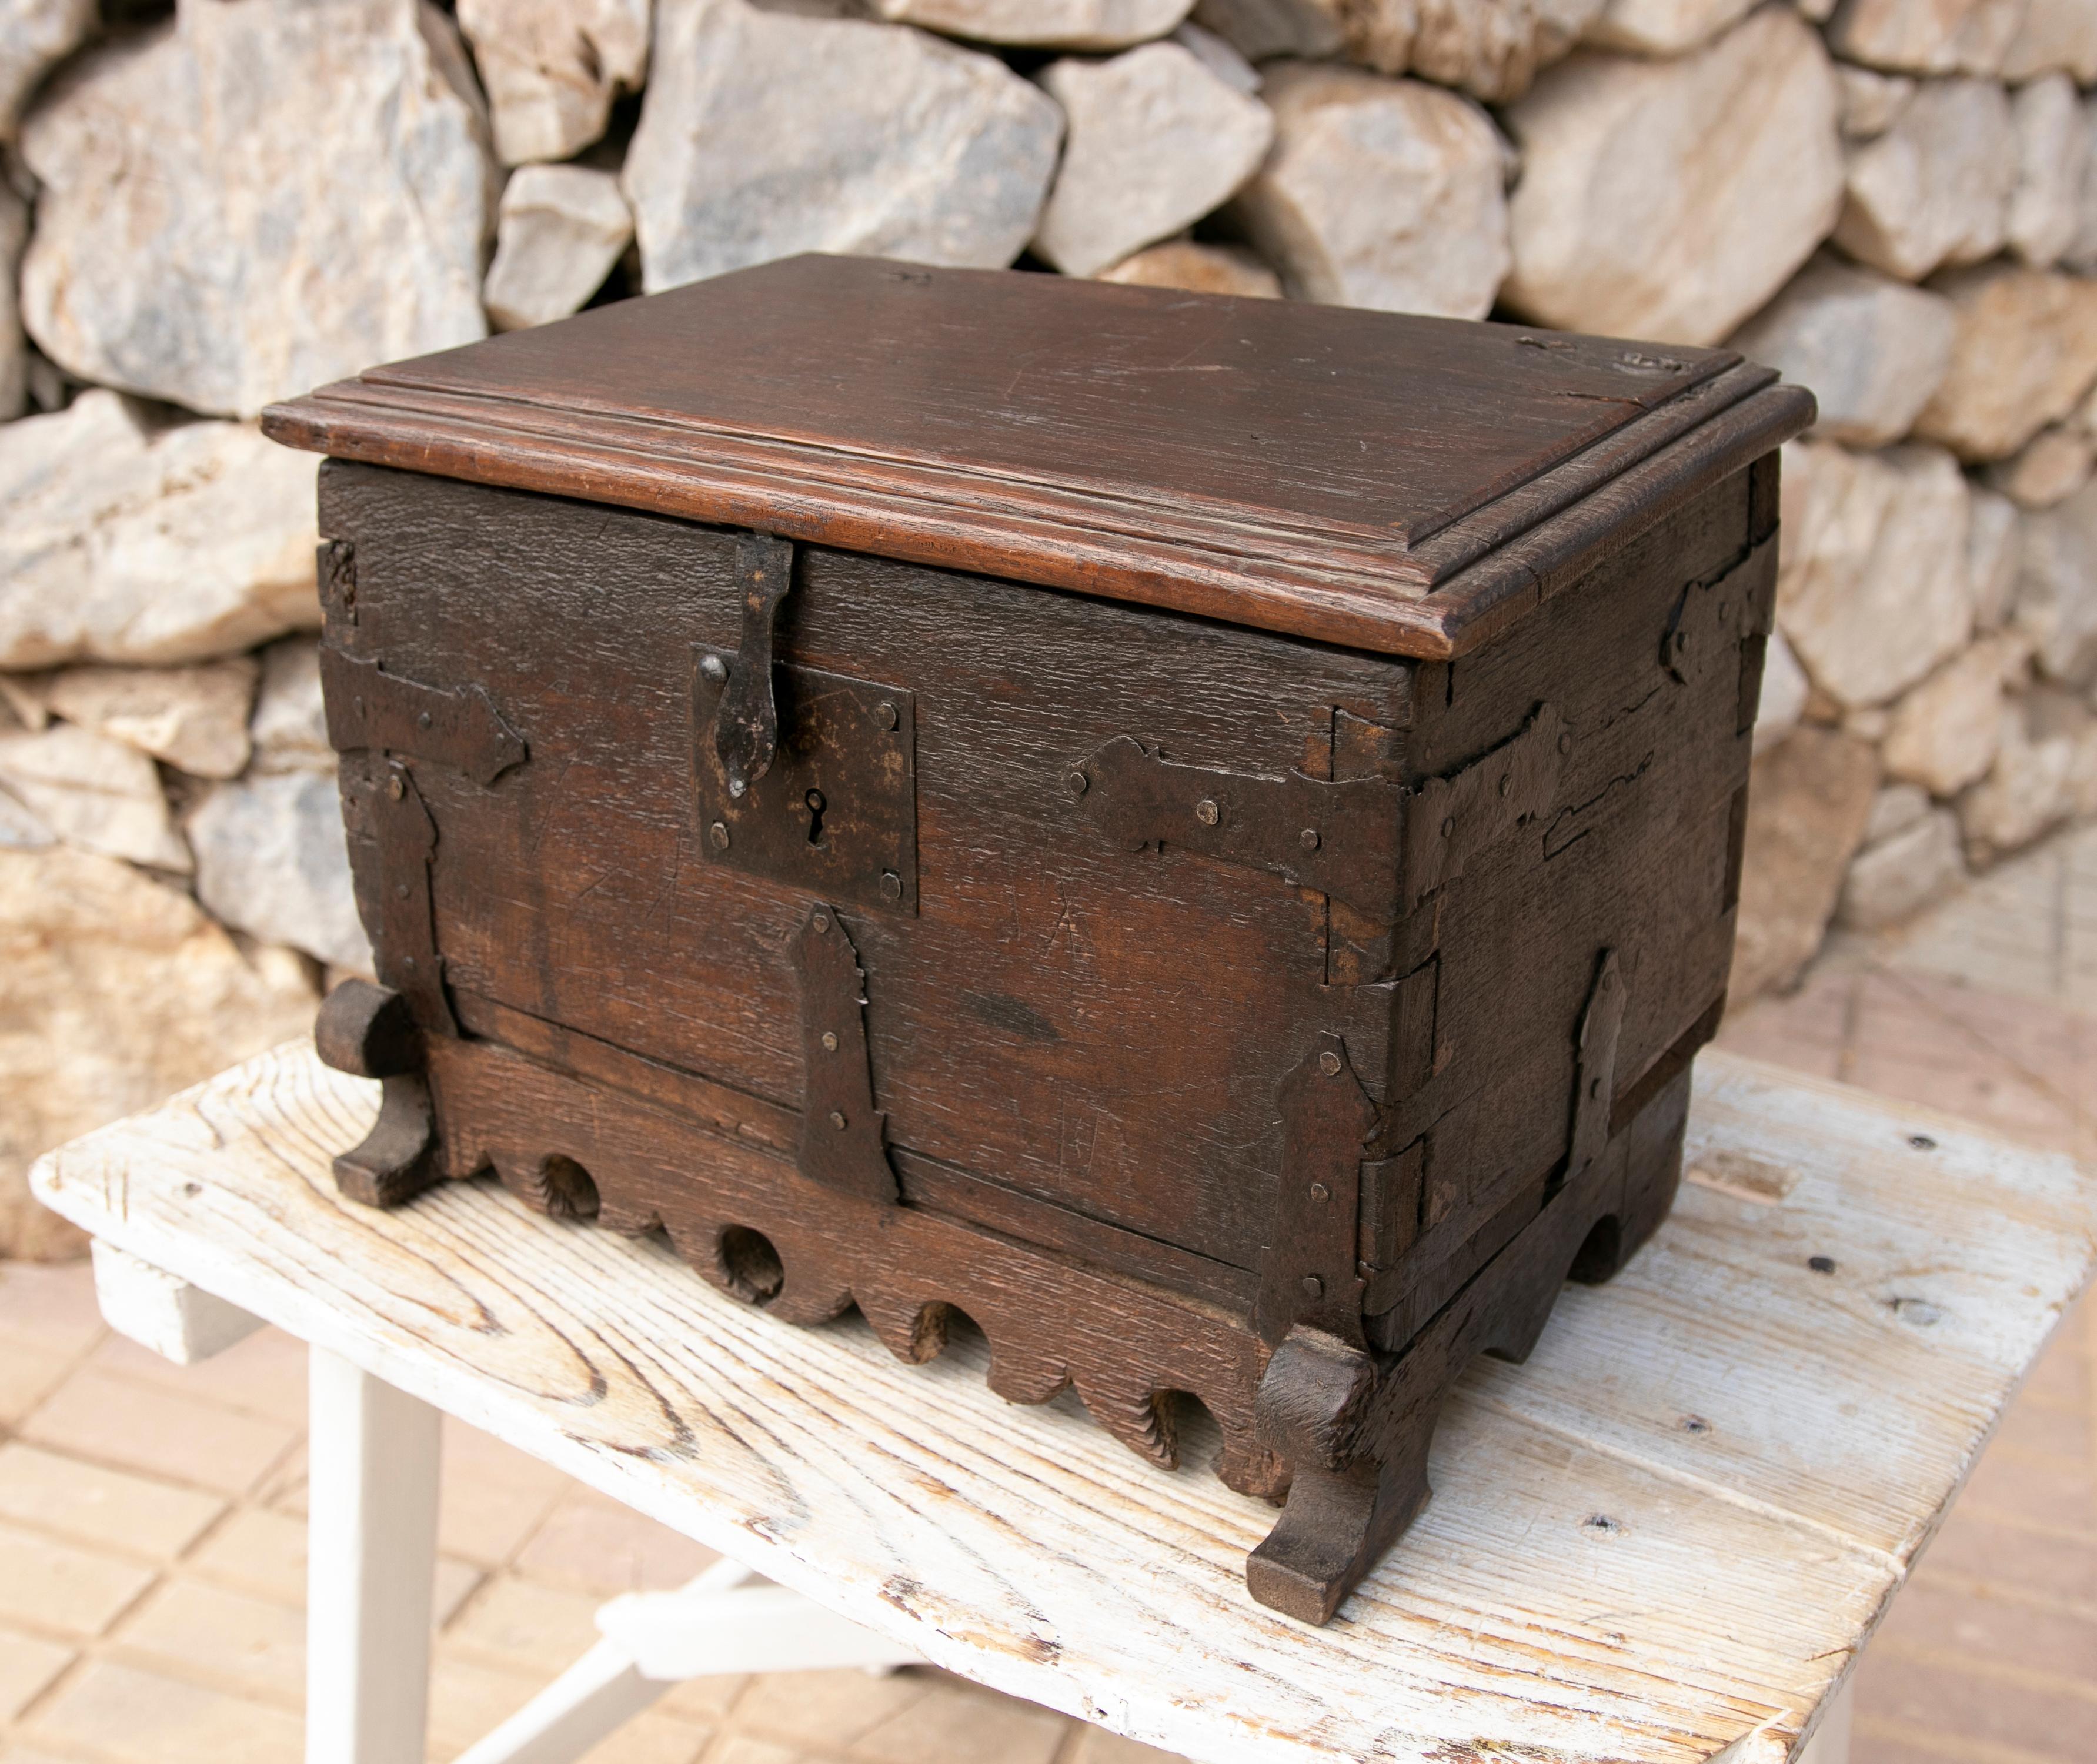 Spanish wooden chest with original iron fittings.